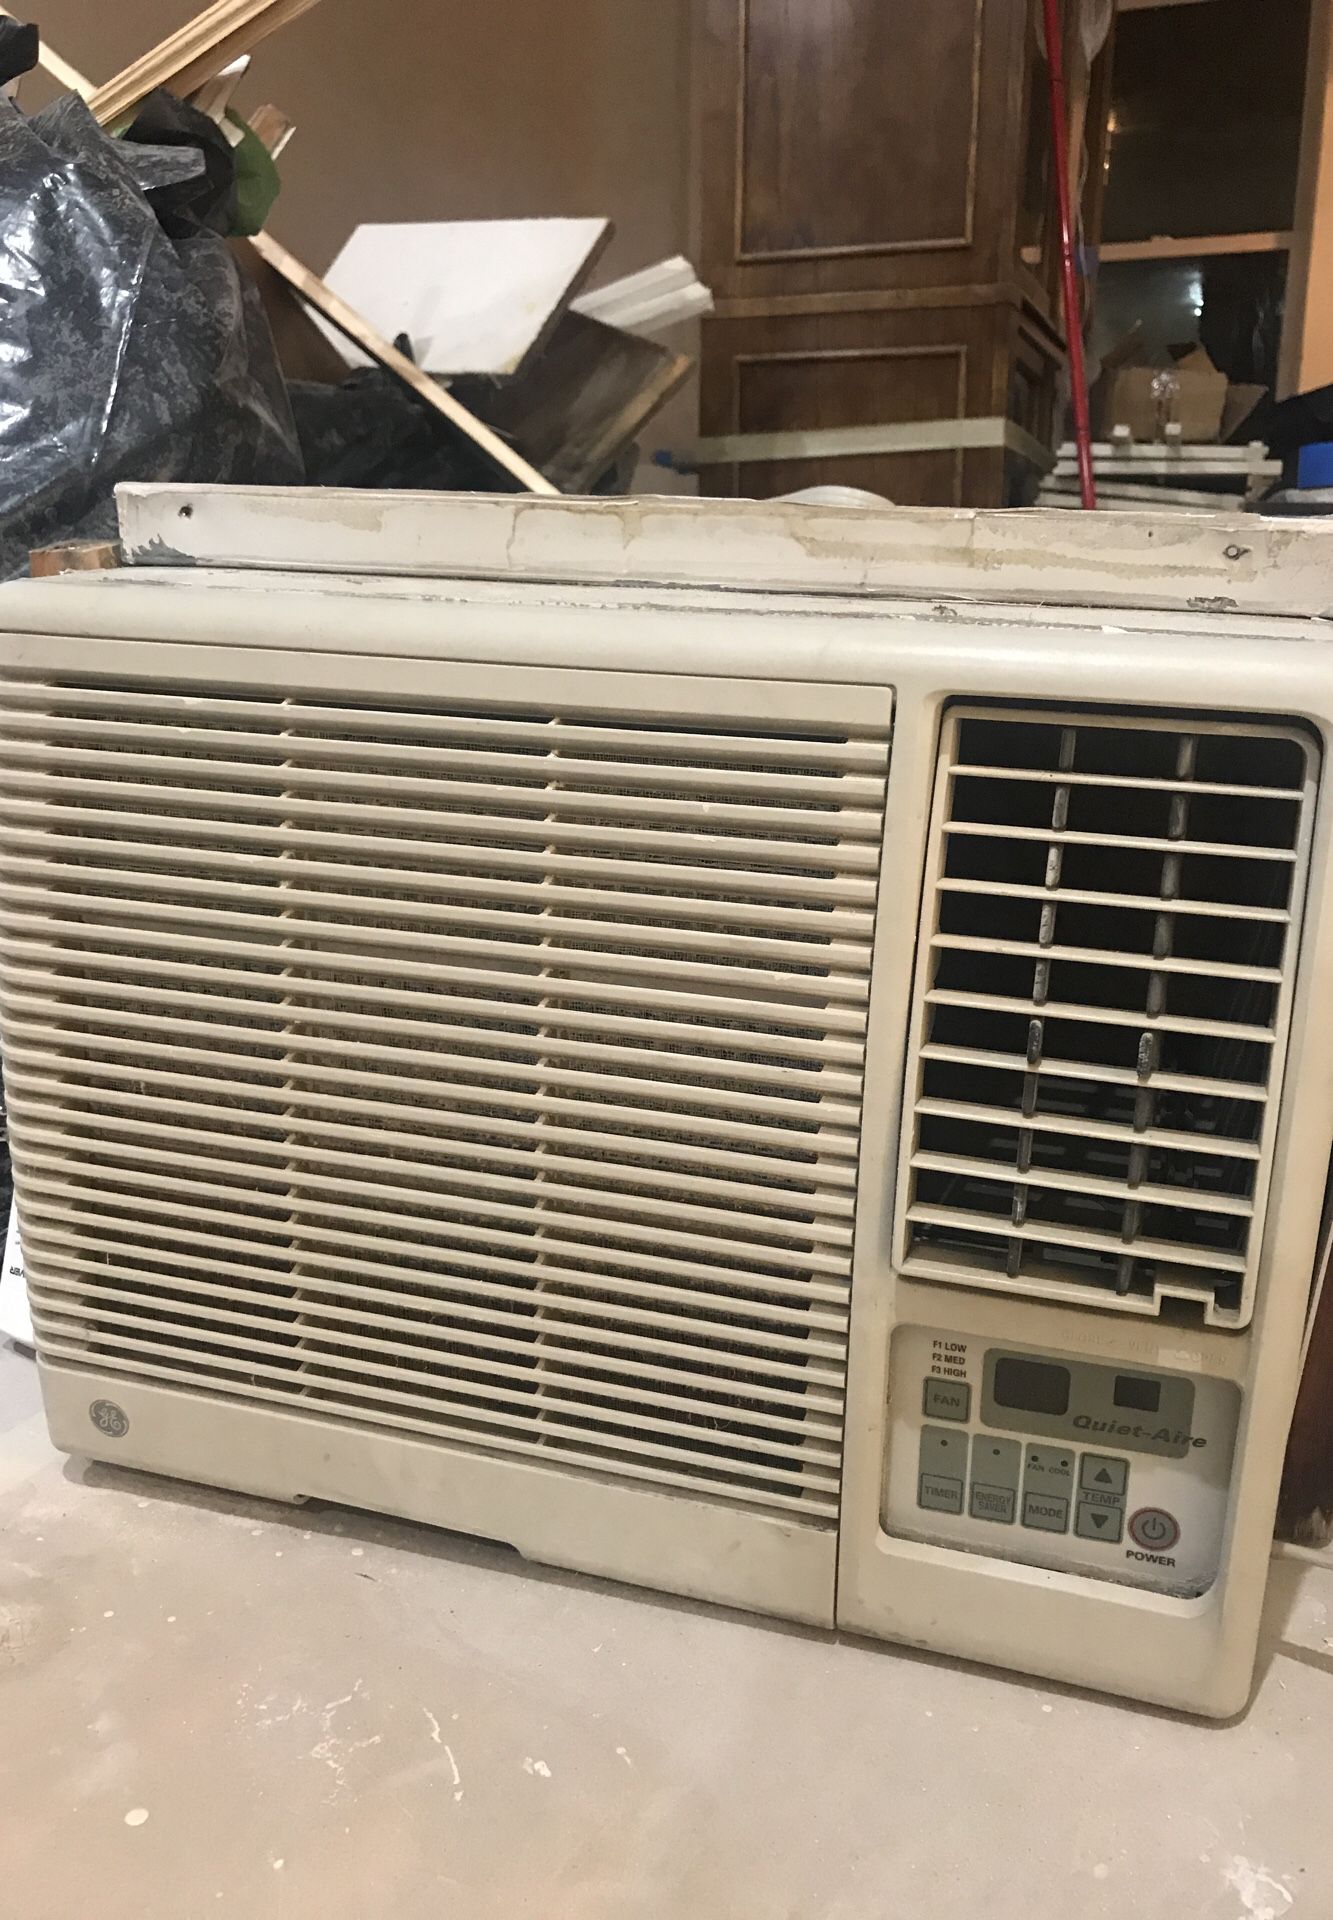 GE Quiet air window air conditioner. Runs great, no issues!